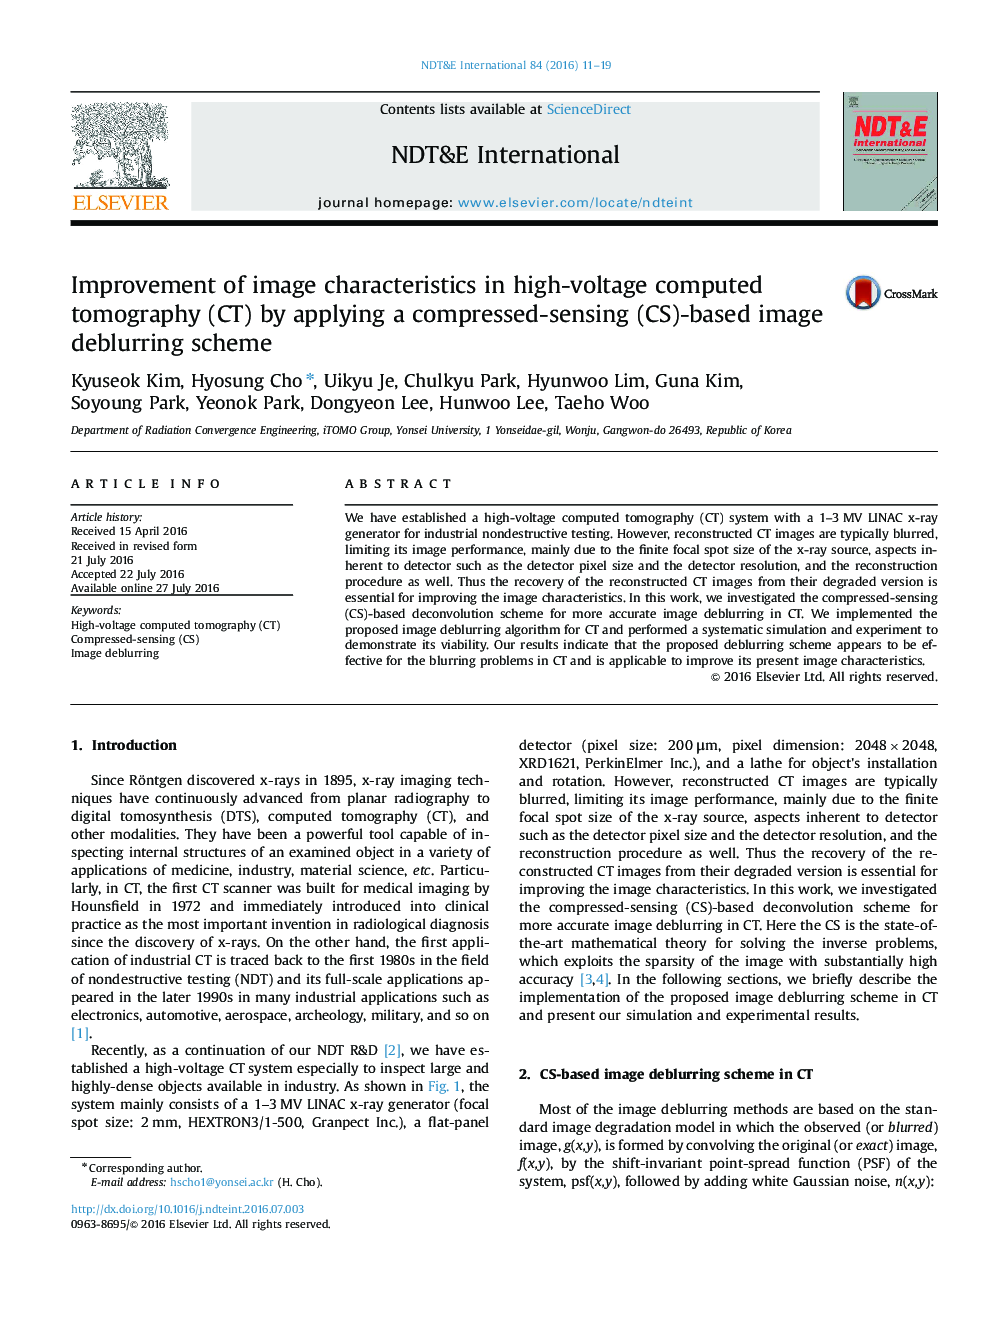 Improvement of image characteristics in high-voltage computed tomography (CT) by applying a compressed-sensing (CS)-based image deblurring scheme